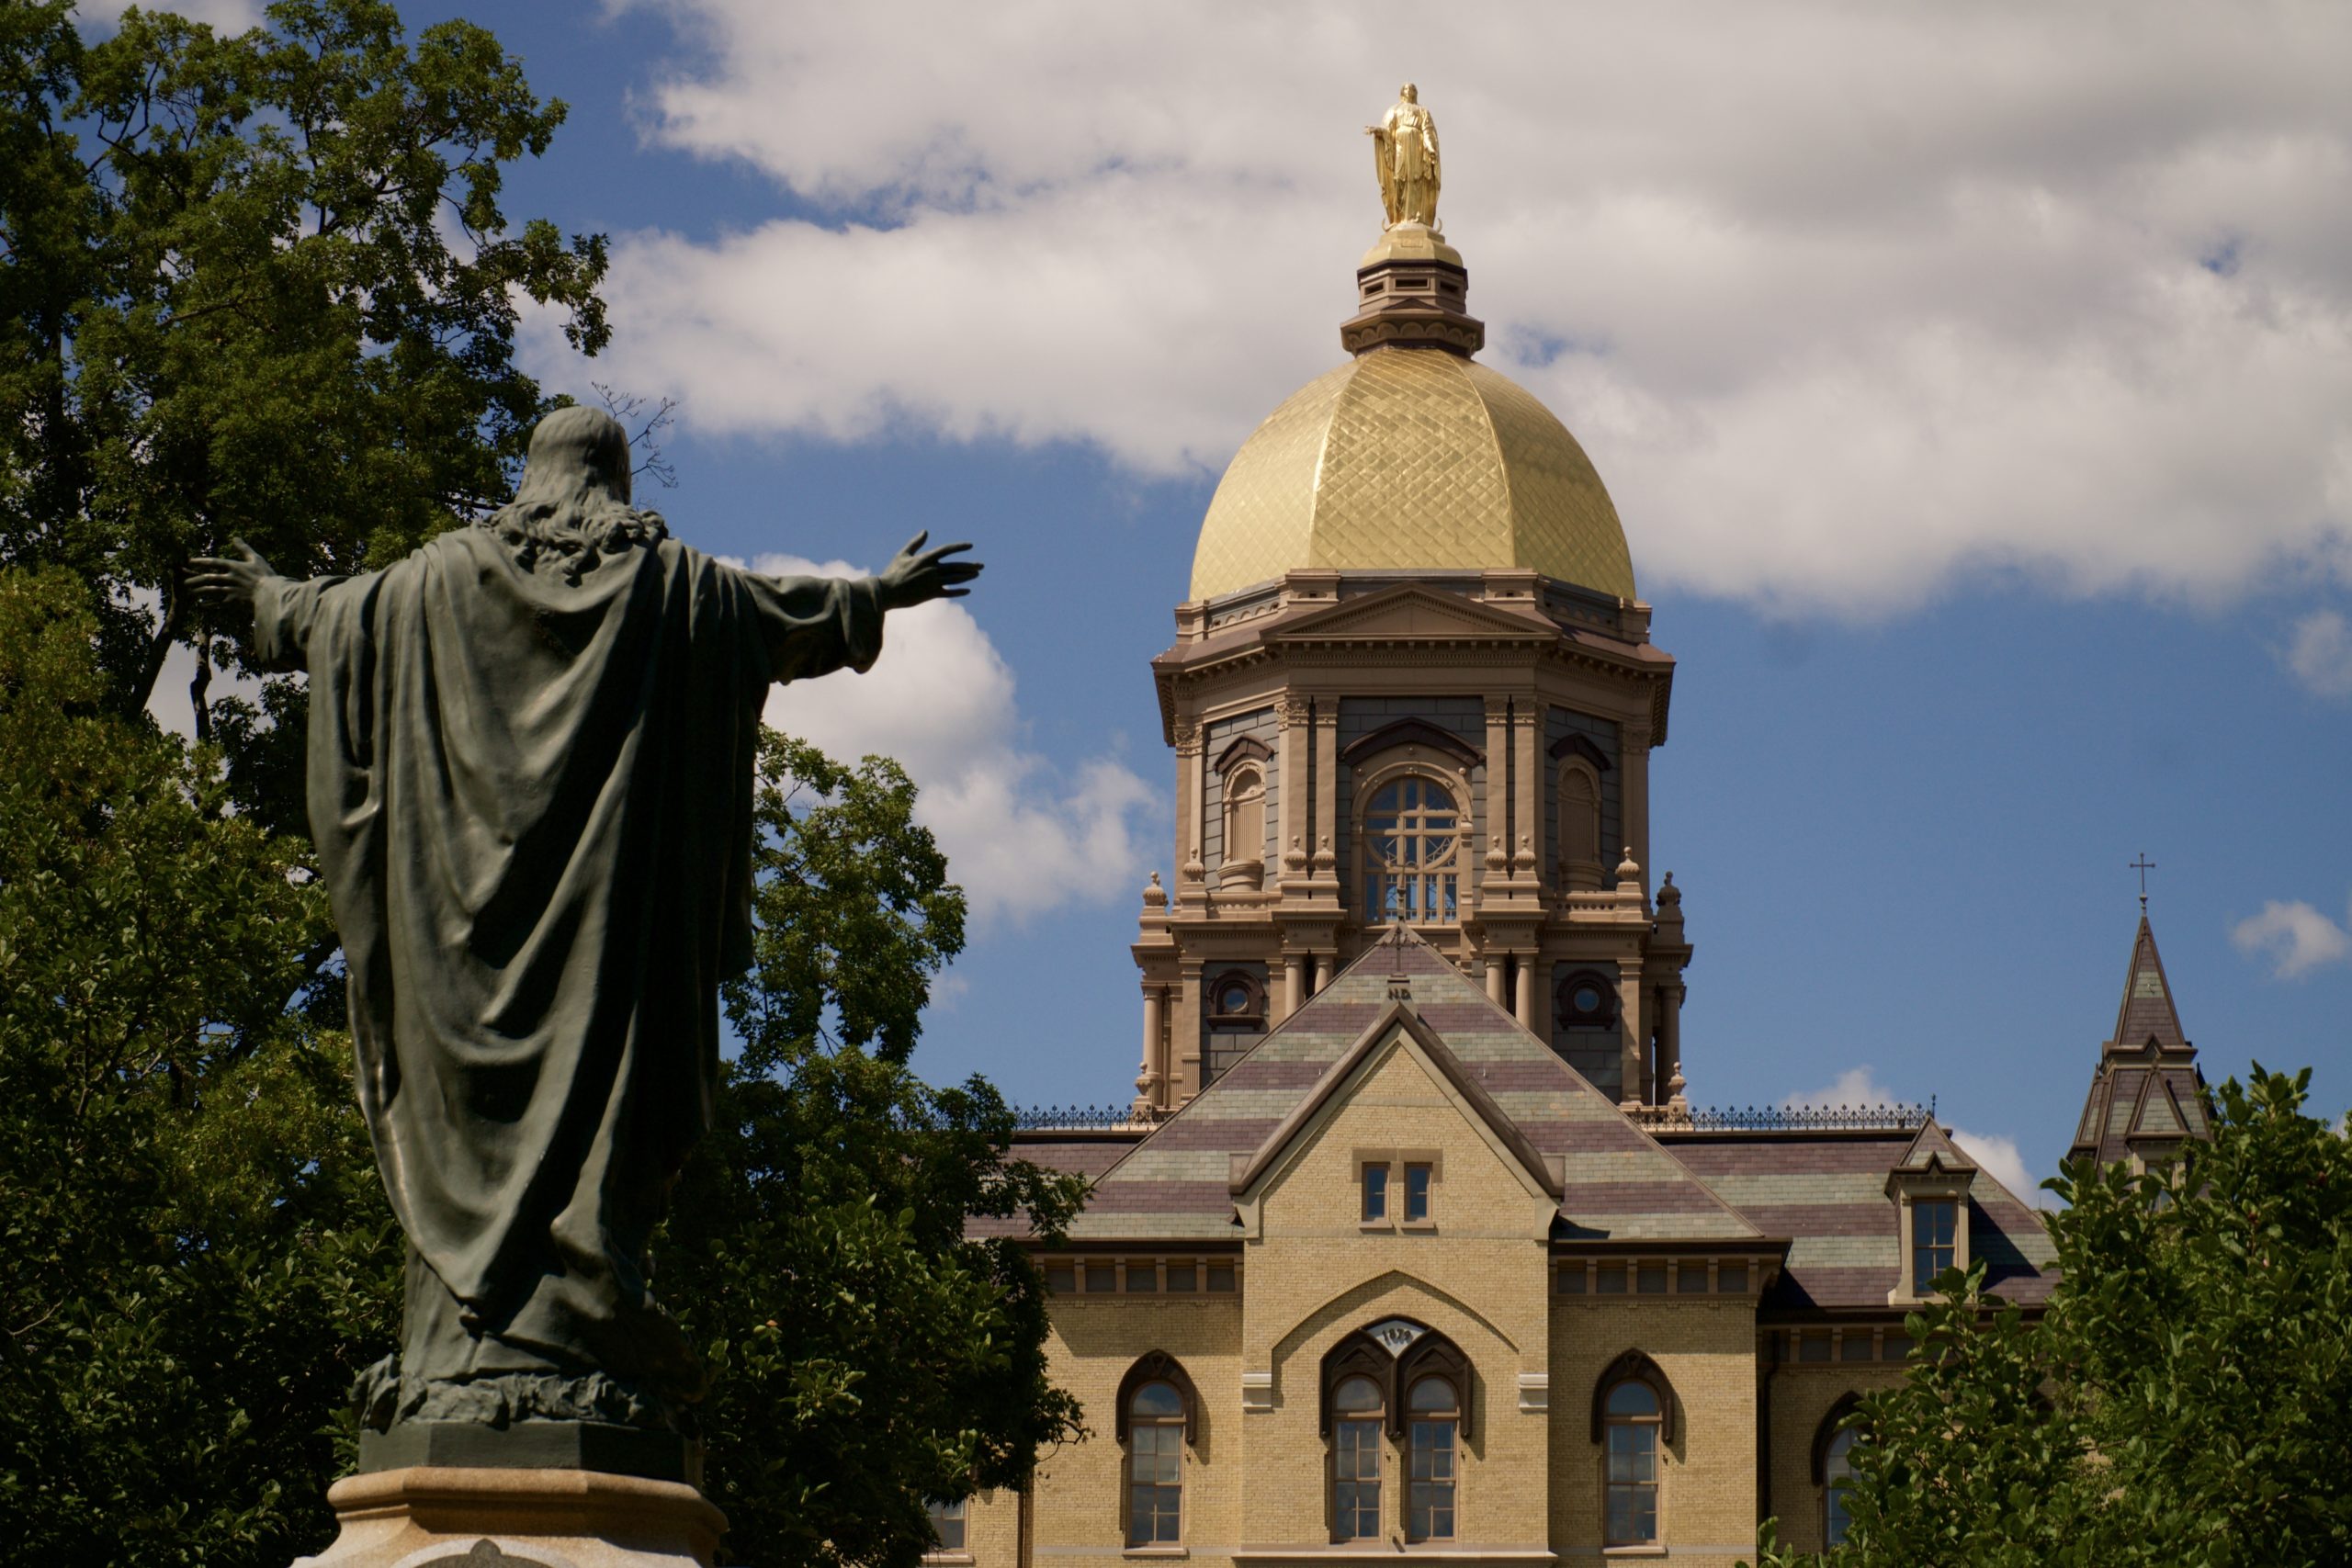 The,Golden,Dome,Atop,The,Main,Building,At,The,University